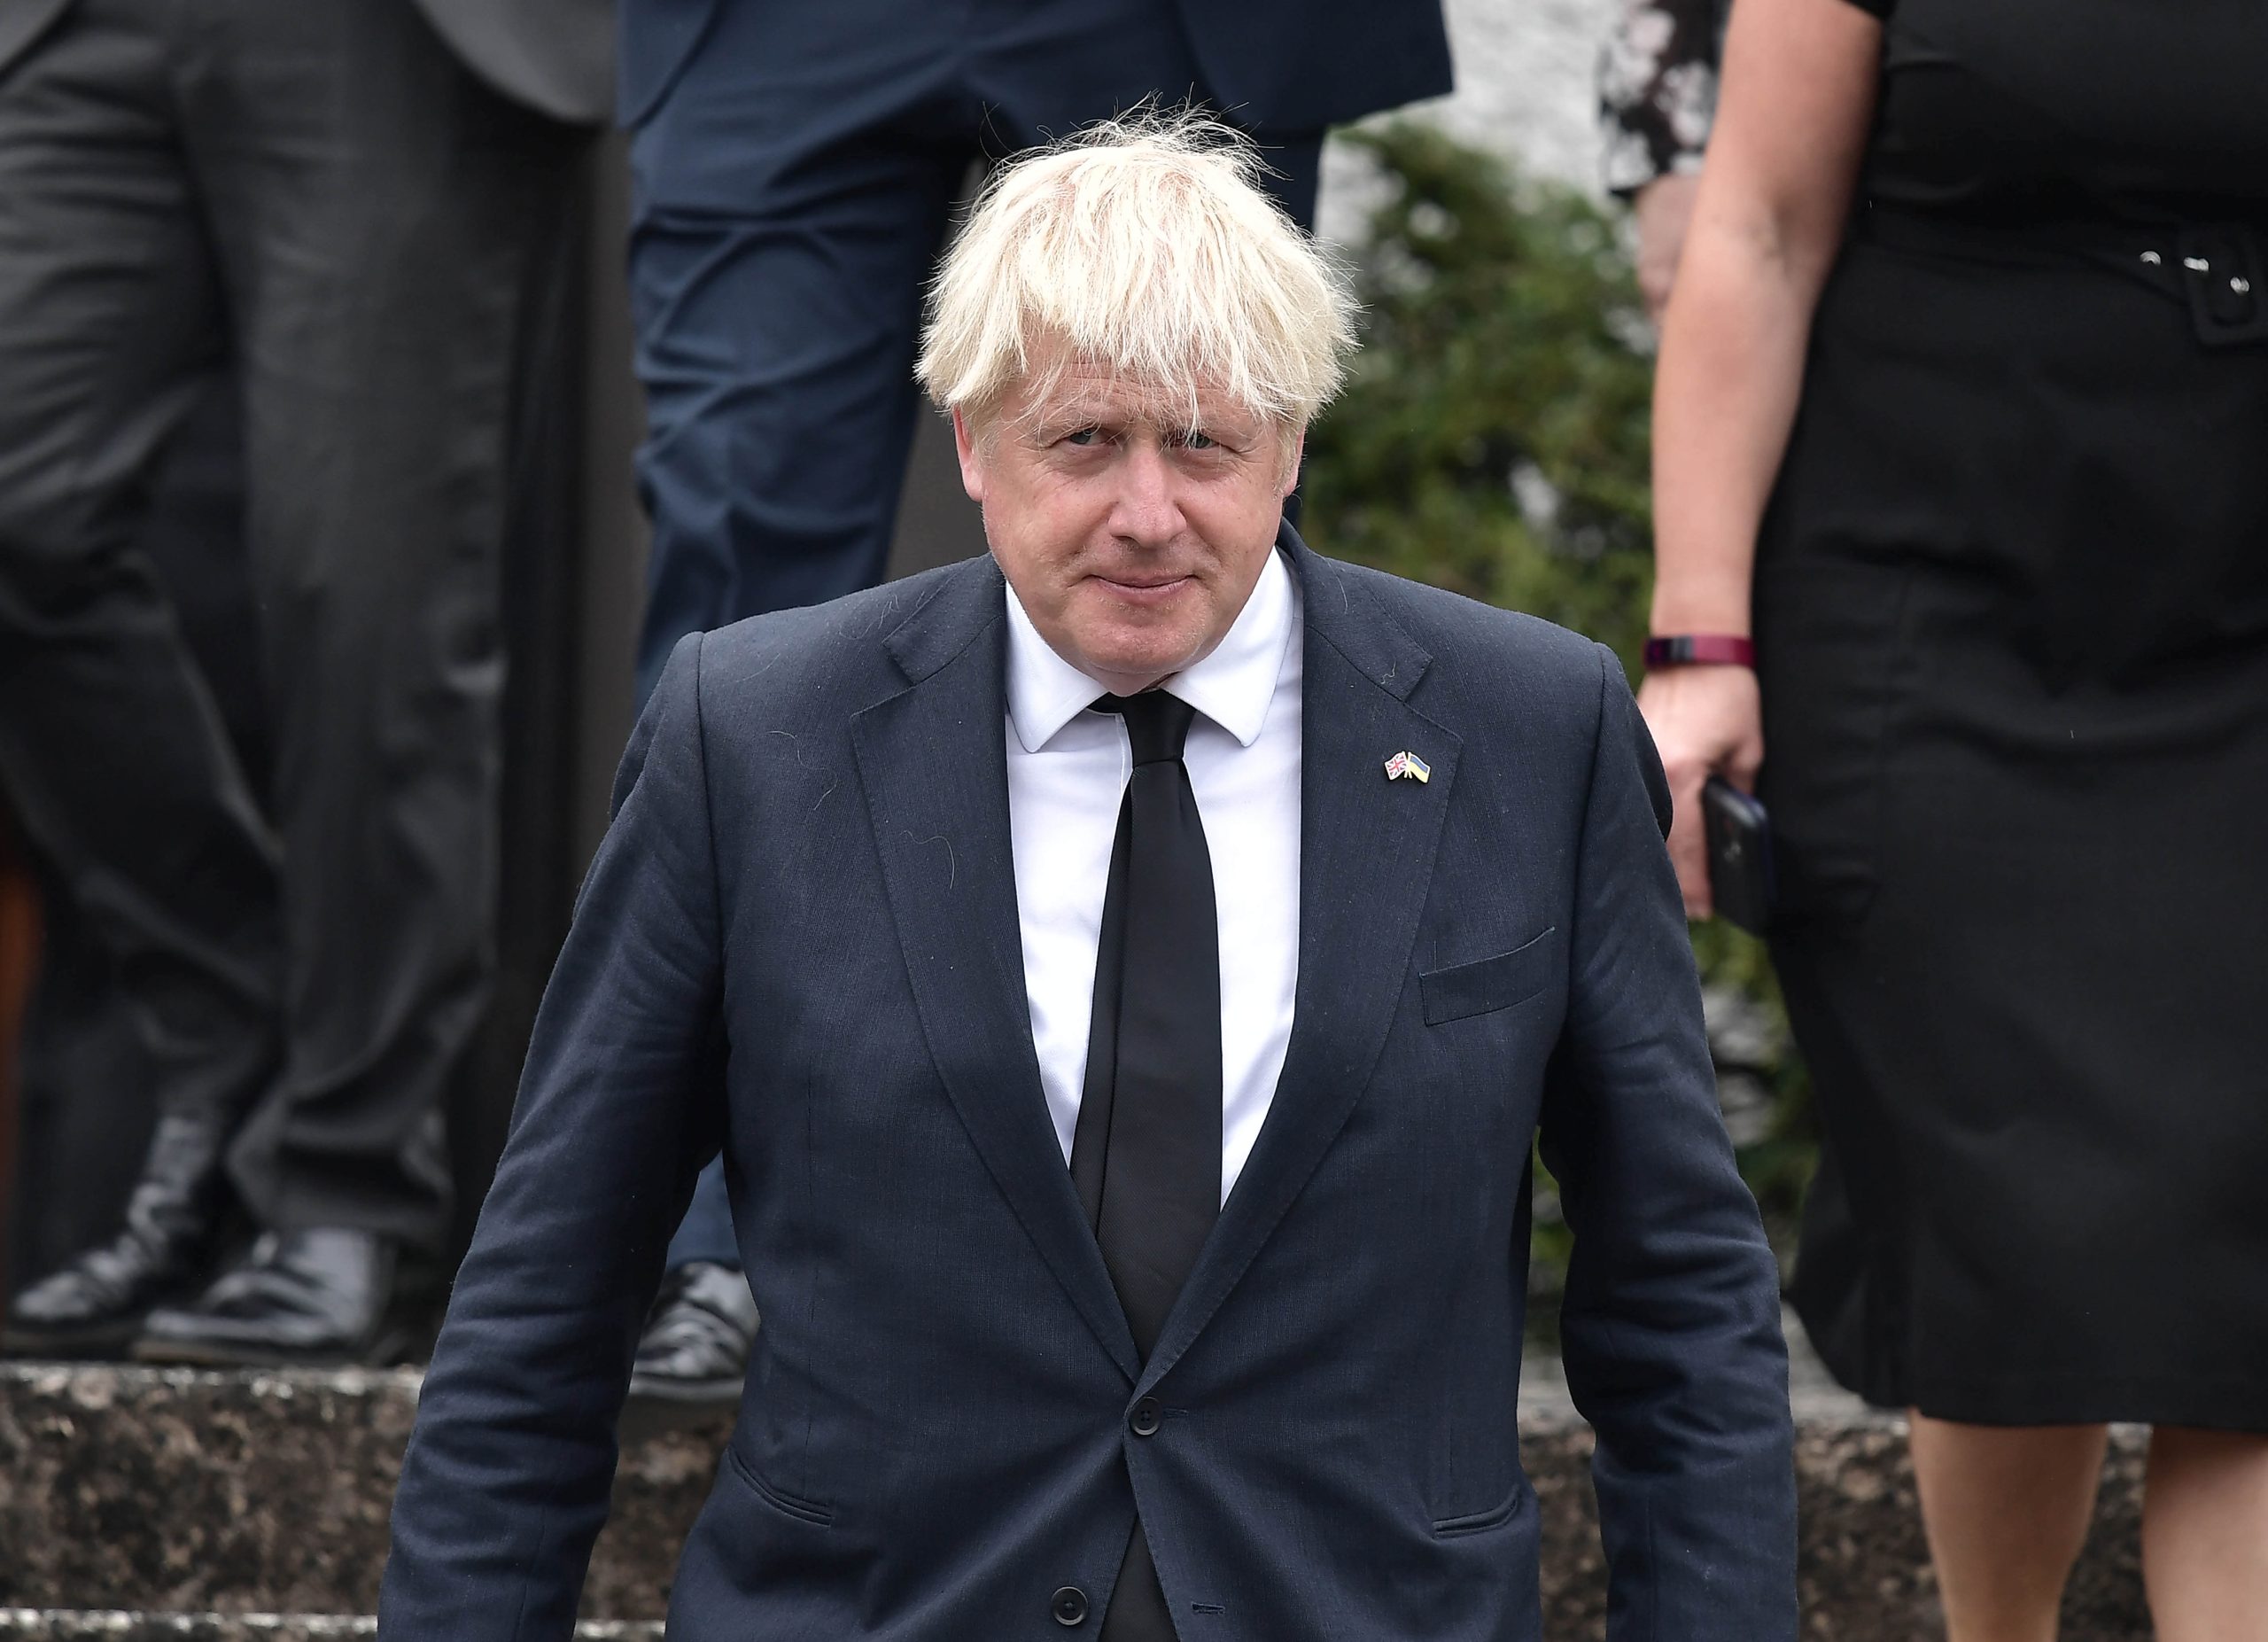 Boris Johnson’s Controversial Honours List Reflects His Troubled Legacy in Office